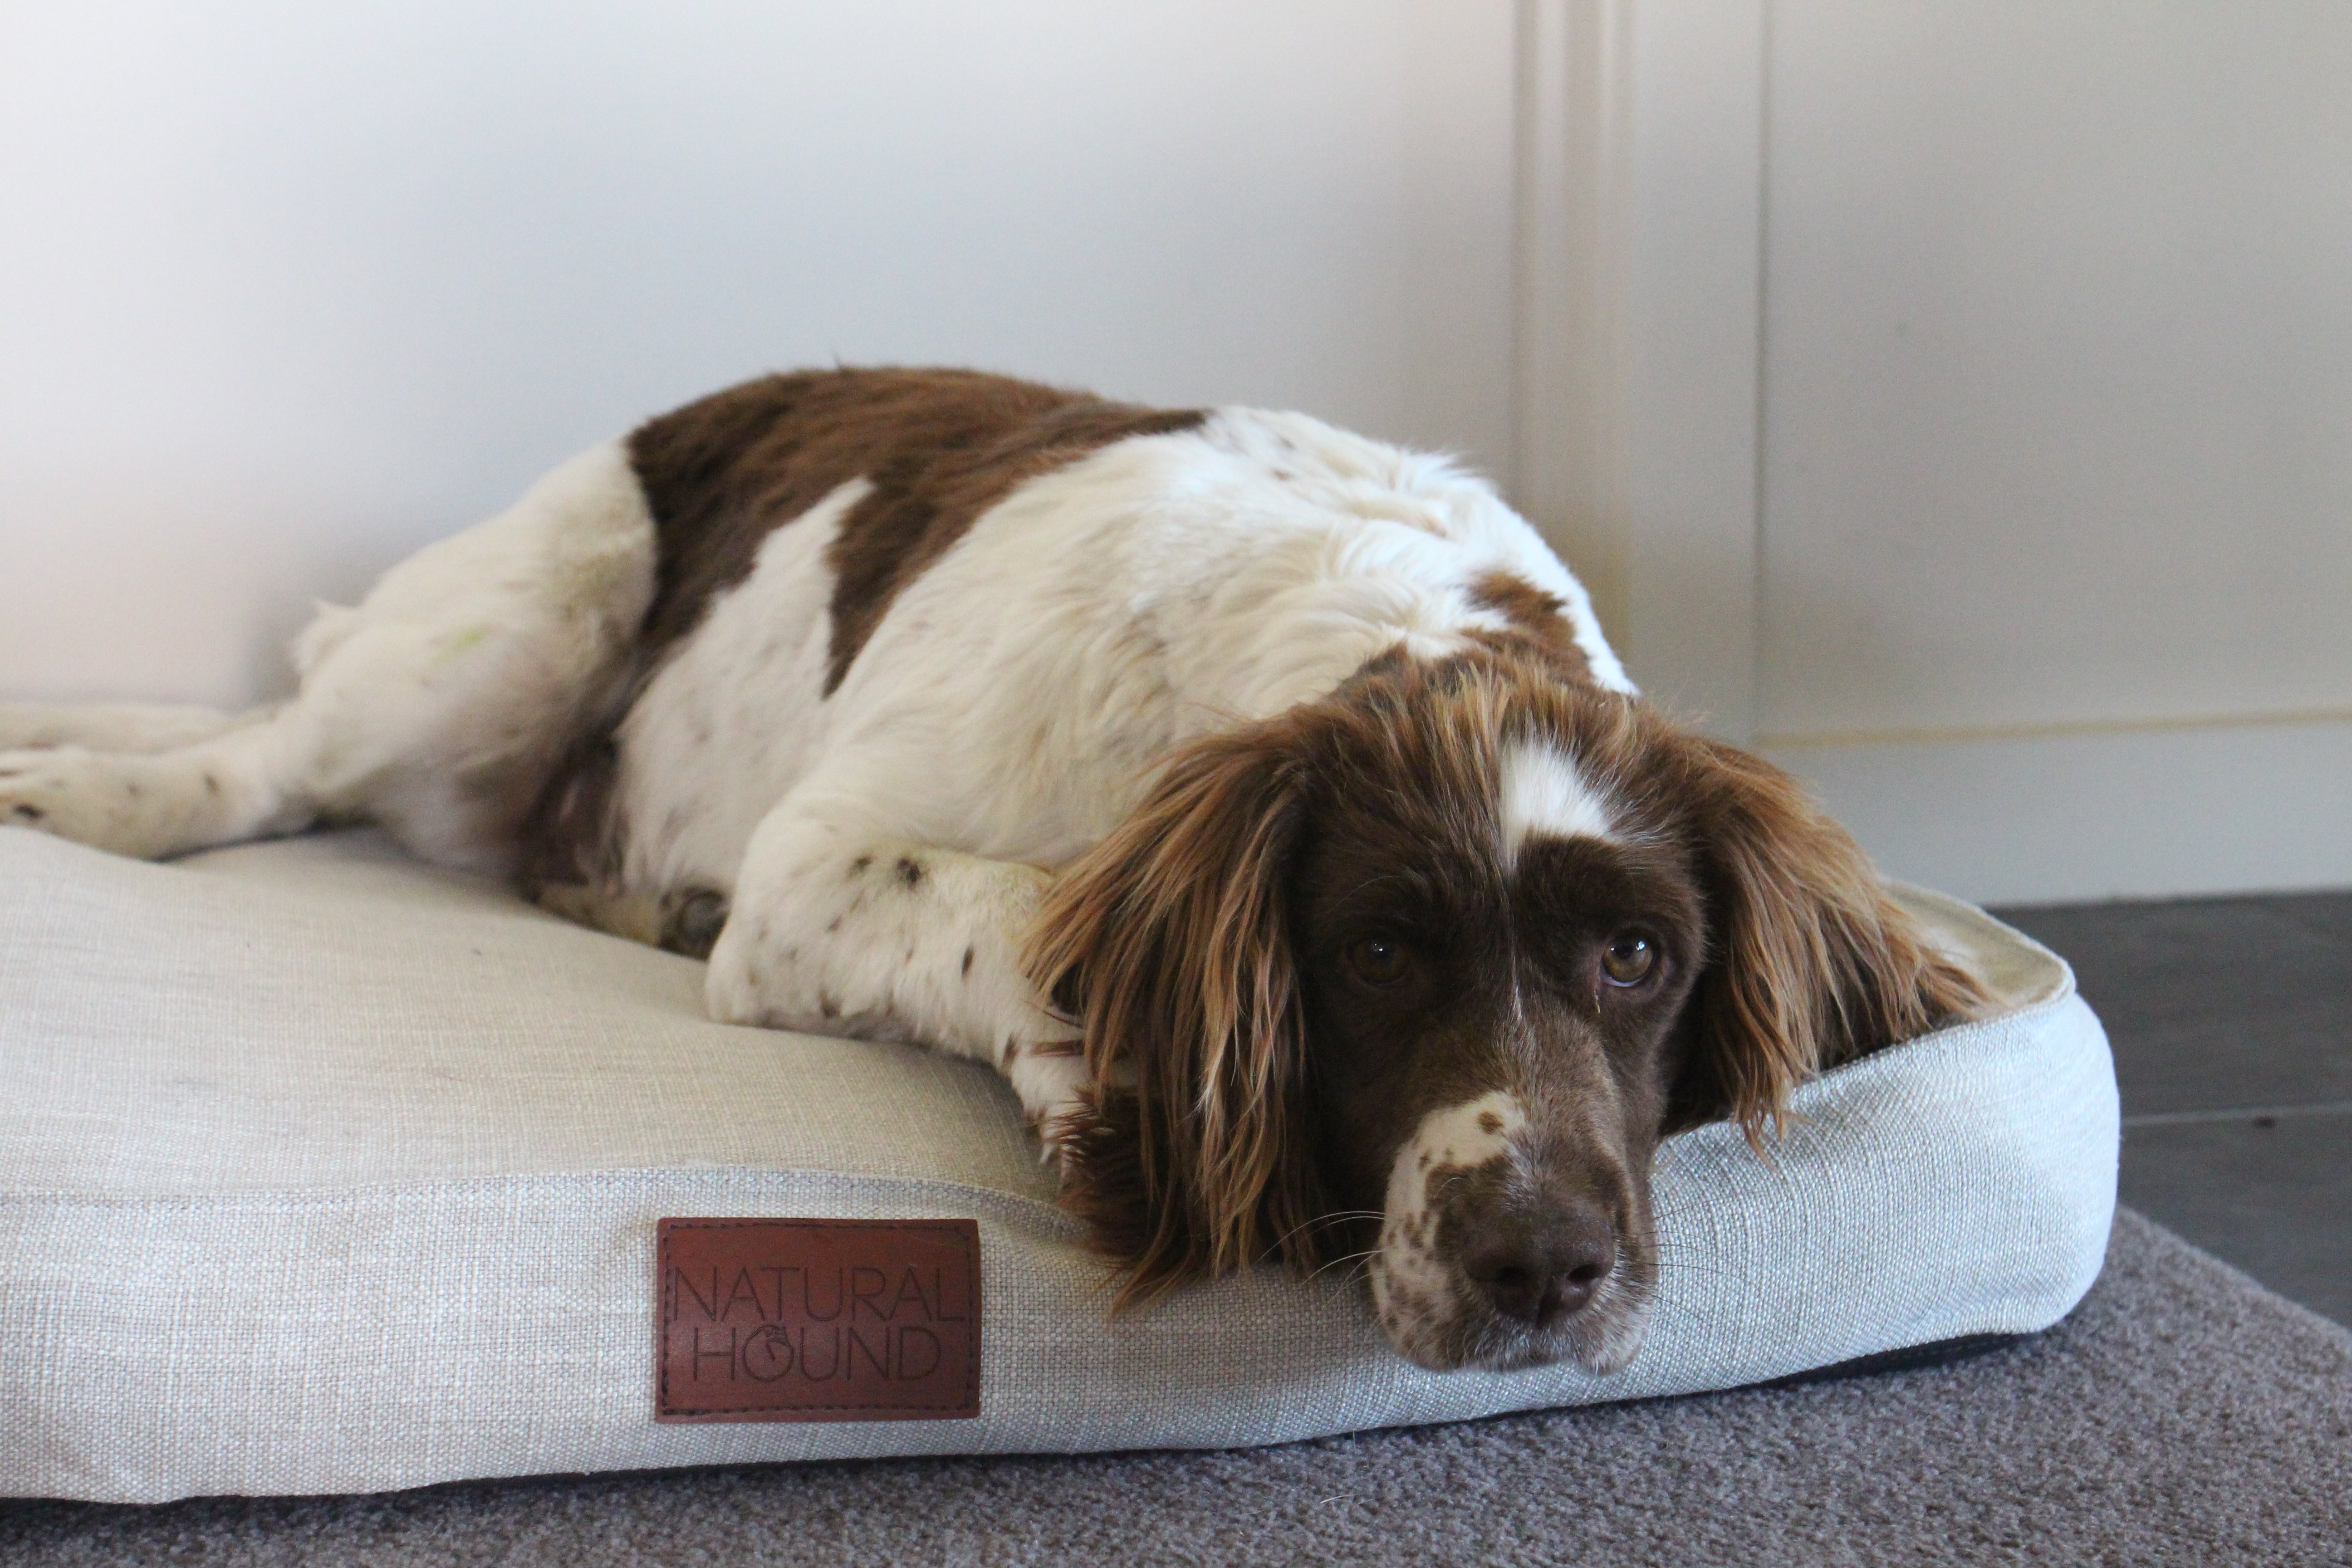 How to Choose the Perfect Dog Bed to Match Your Home Decor